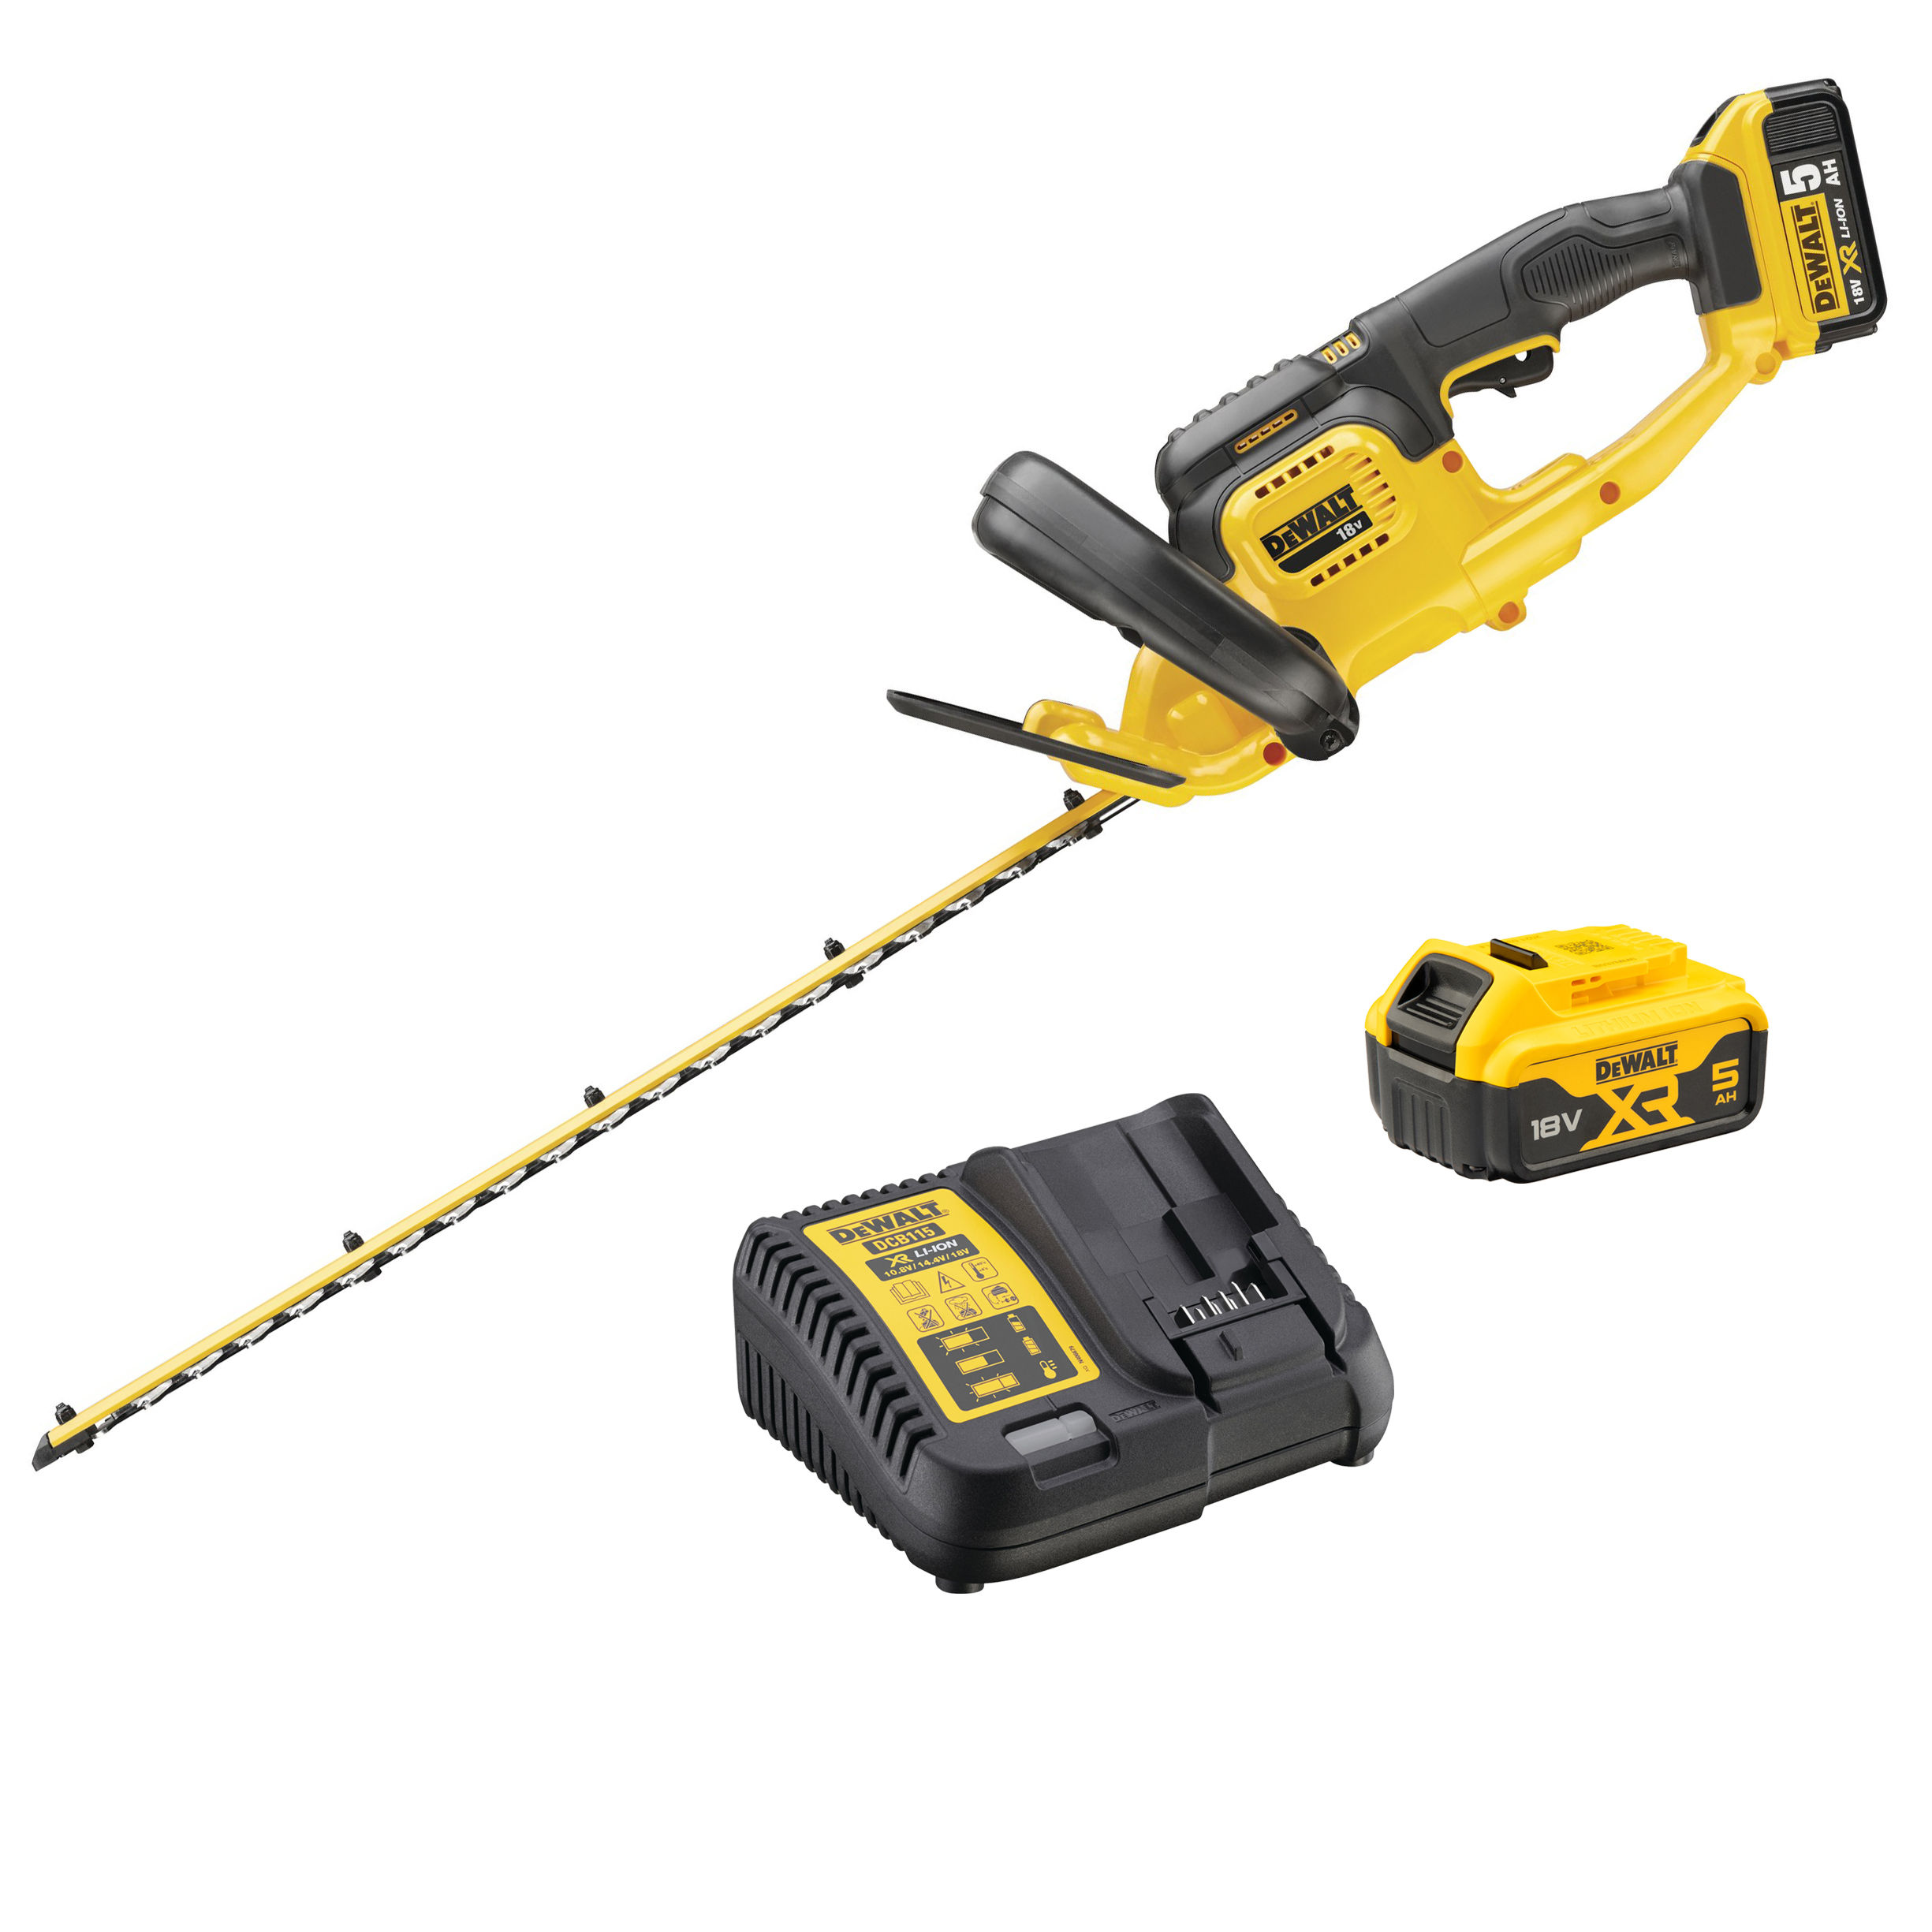 DeWalt Cordless Hedge Trimmer Kit with Battery and Charger - 55cm (18v 5.0AH) DCM563P1-GB